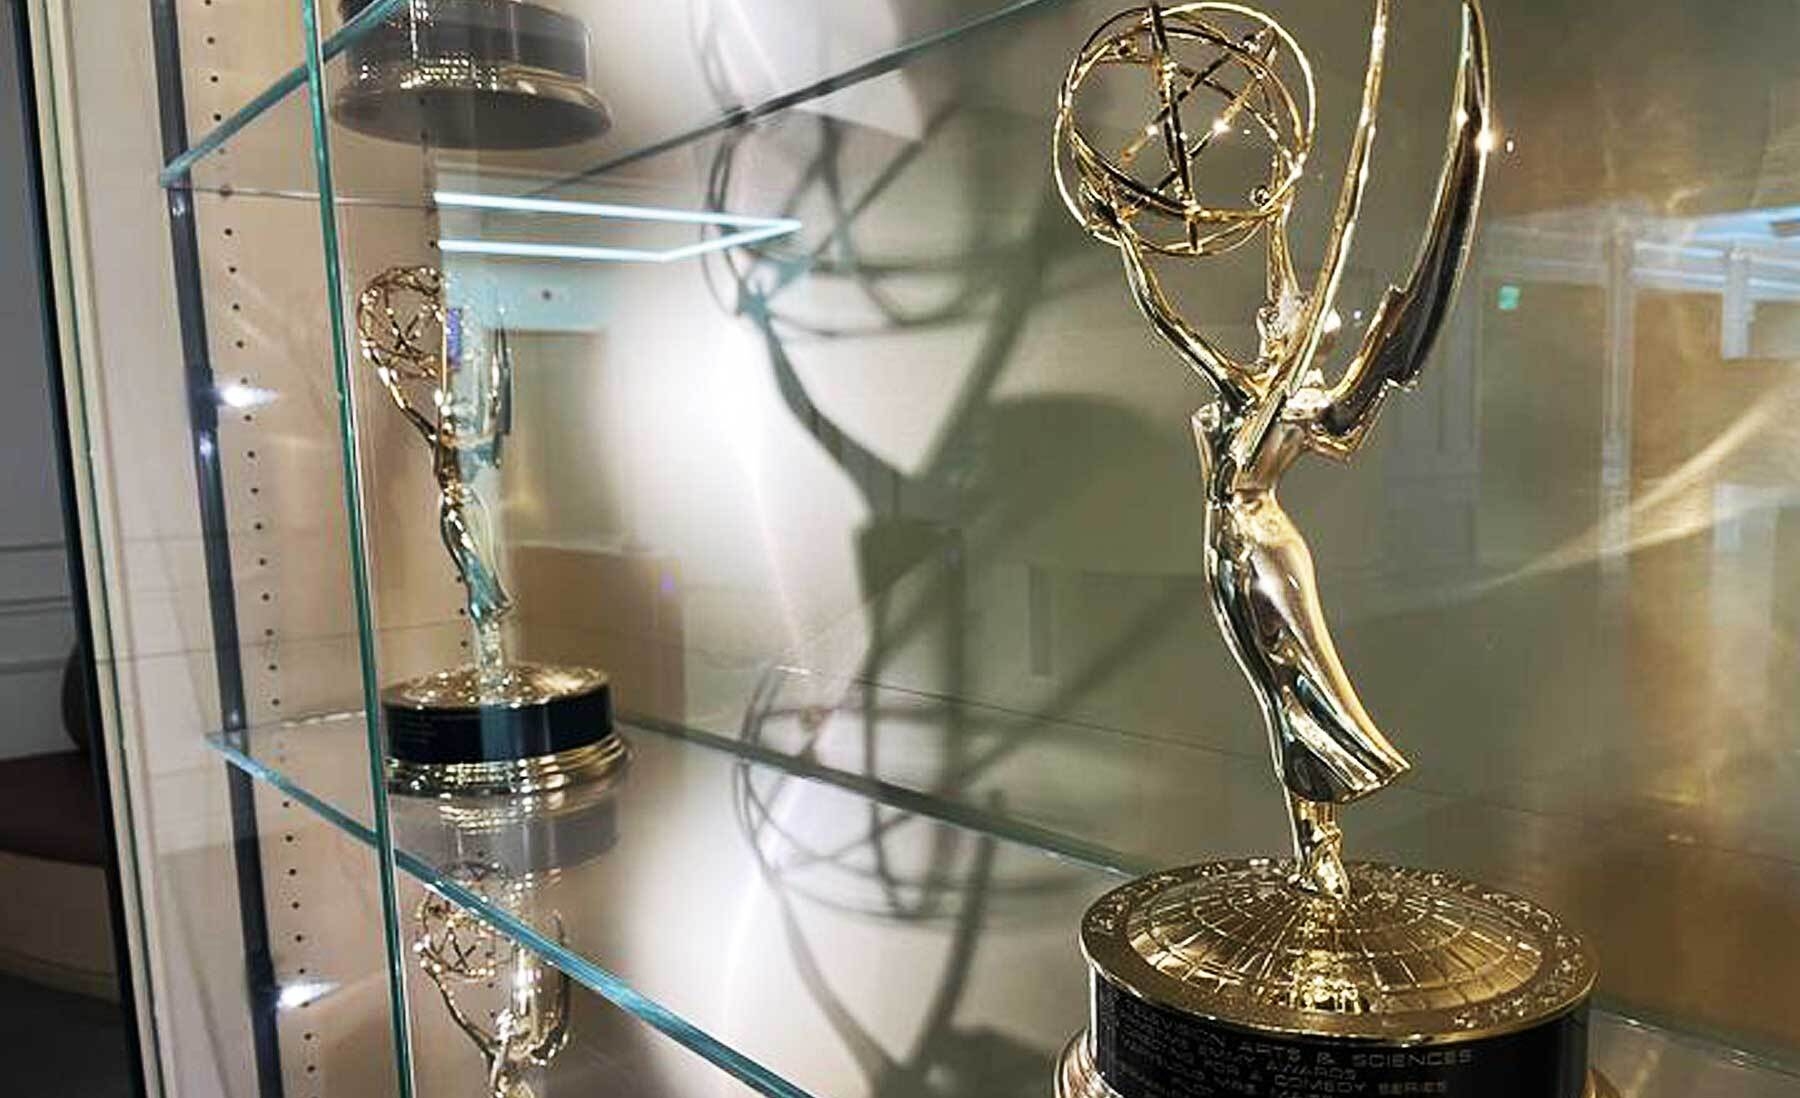 An image of several Emmy awards in a case